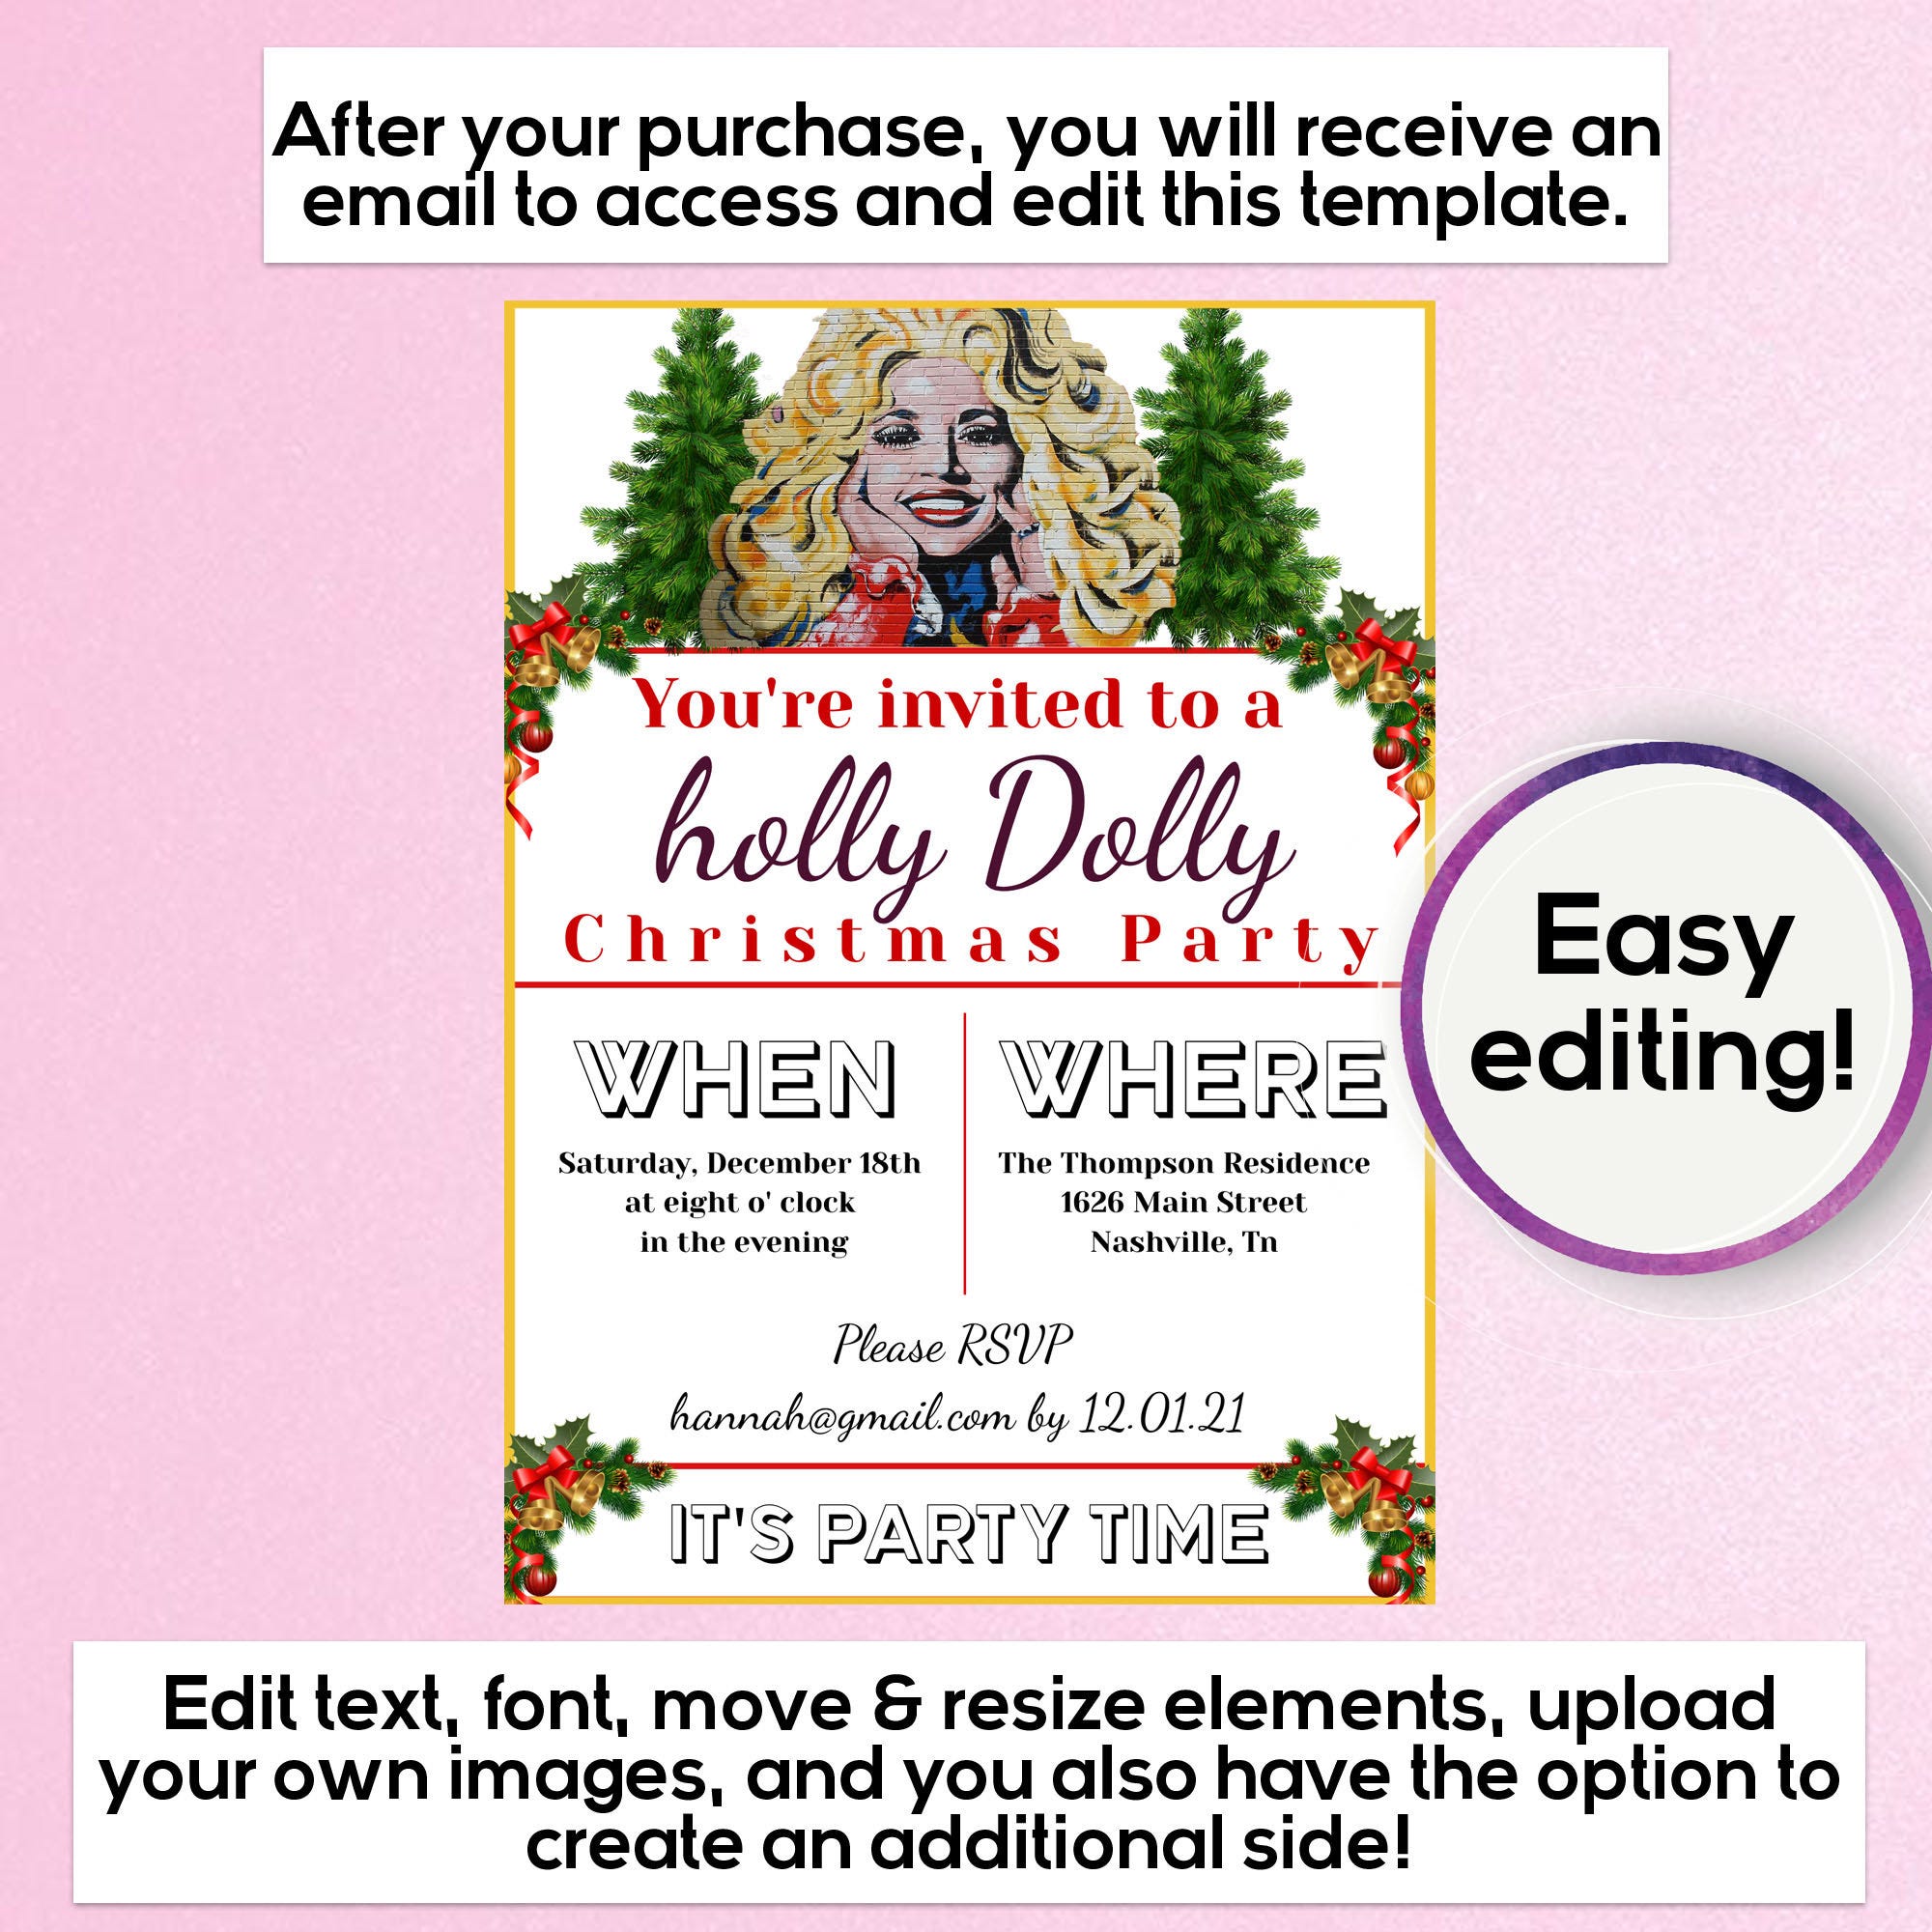 Holly Dolly Christmas Party Invitation Template - for Christmas parties, brunches, dinners, gift exchanges, or any other fun holiday event